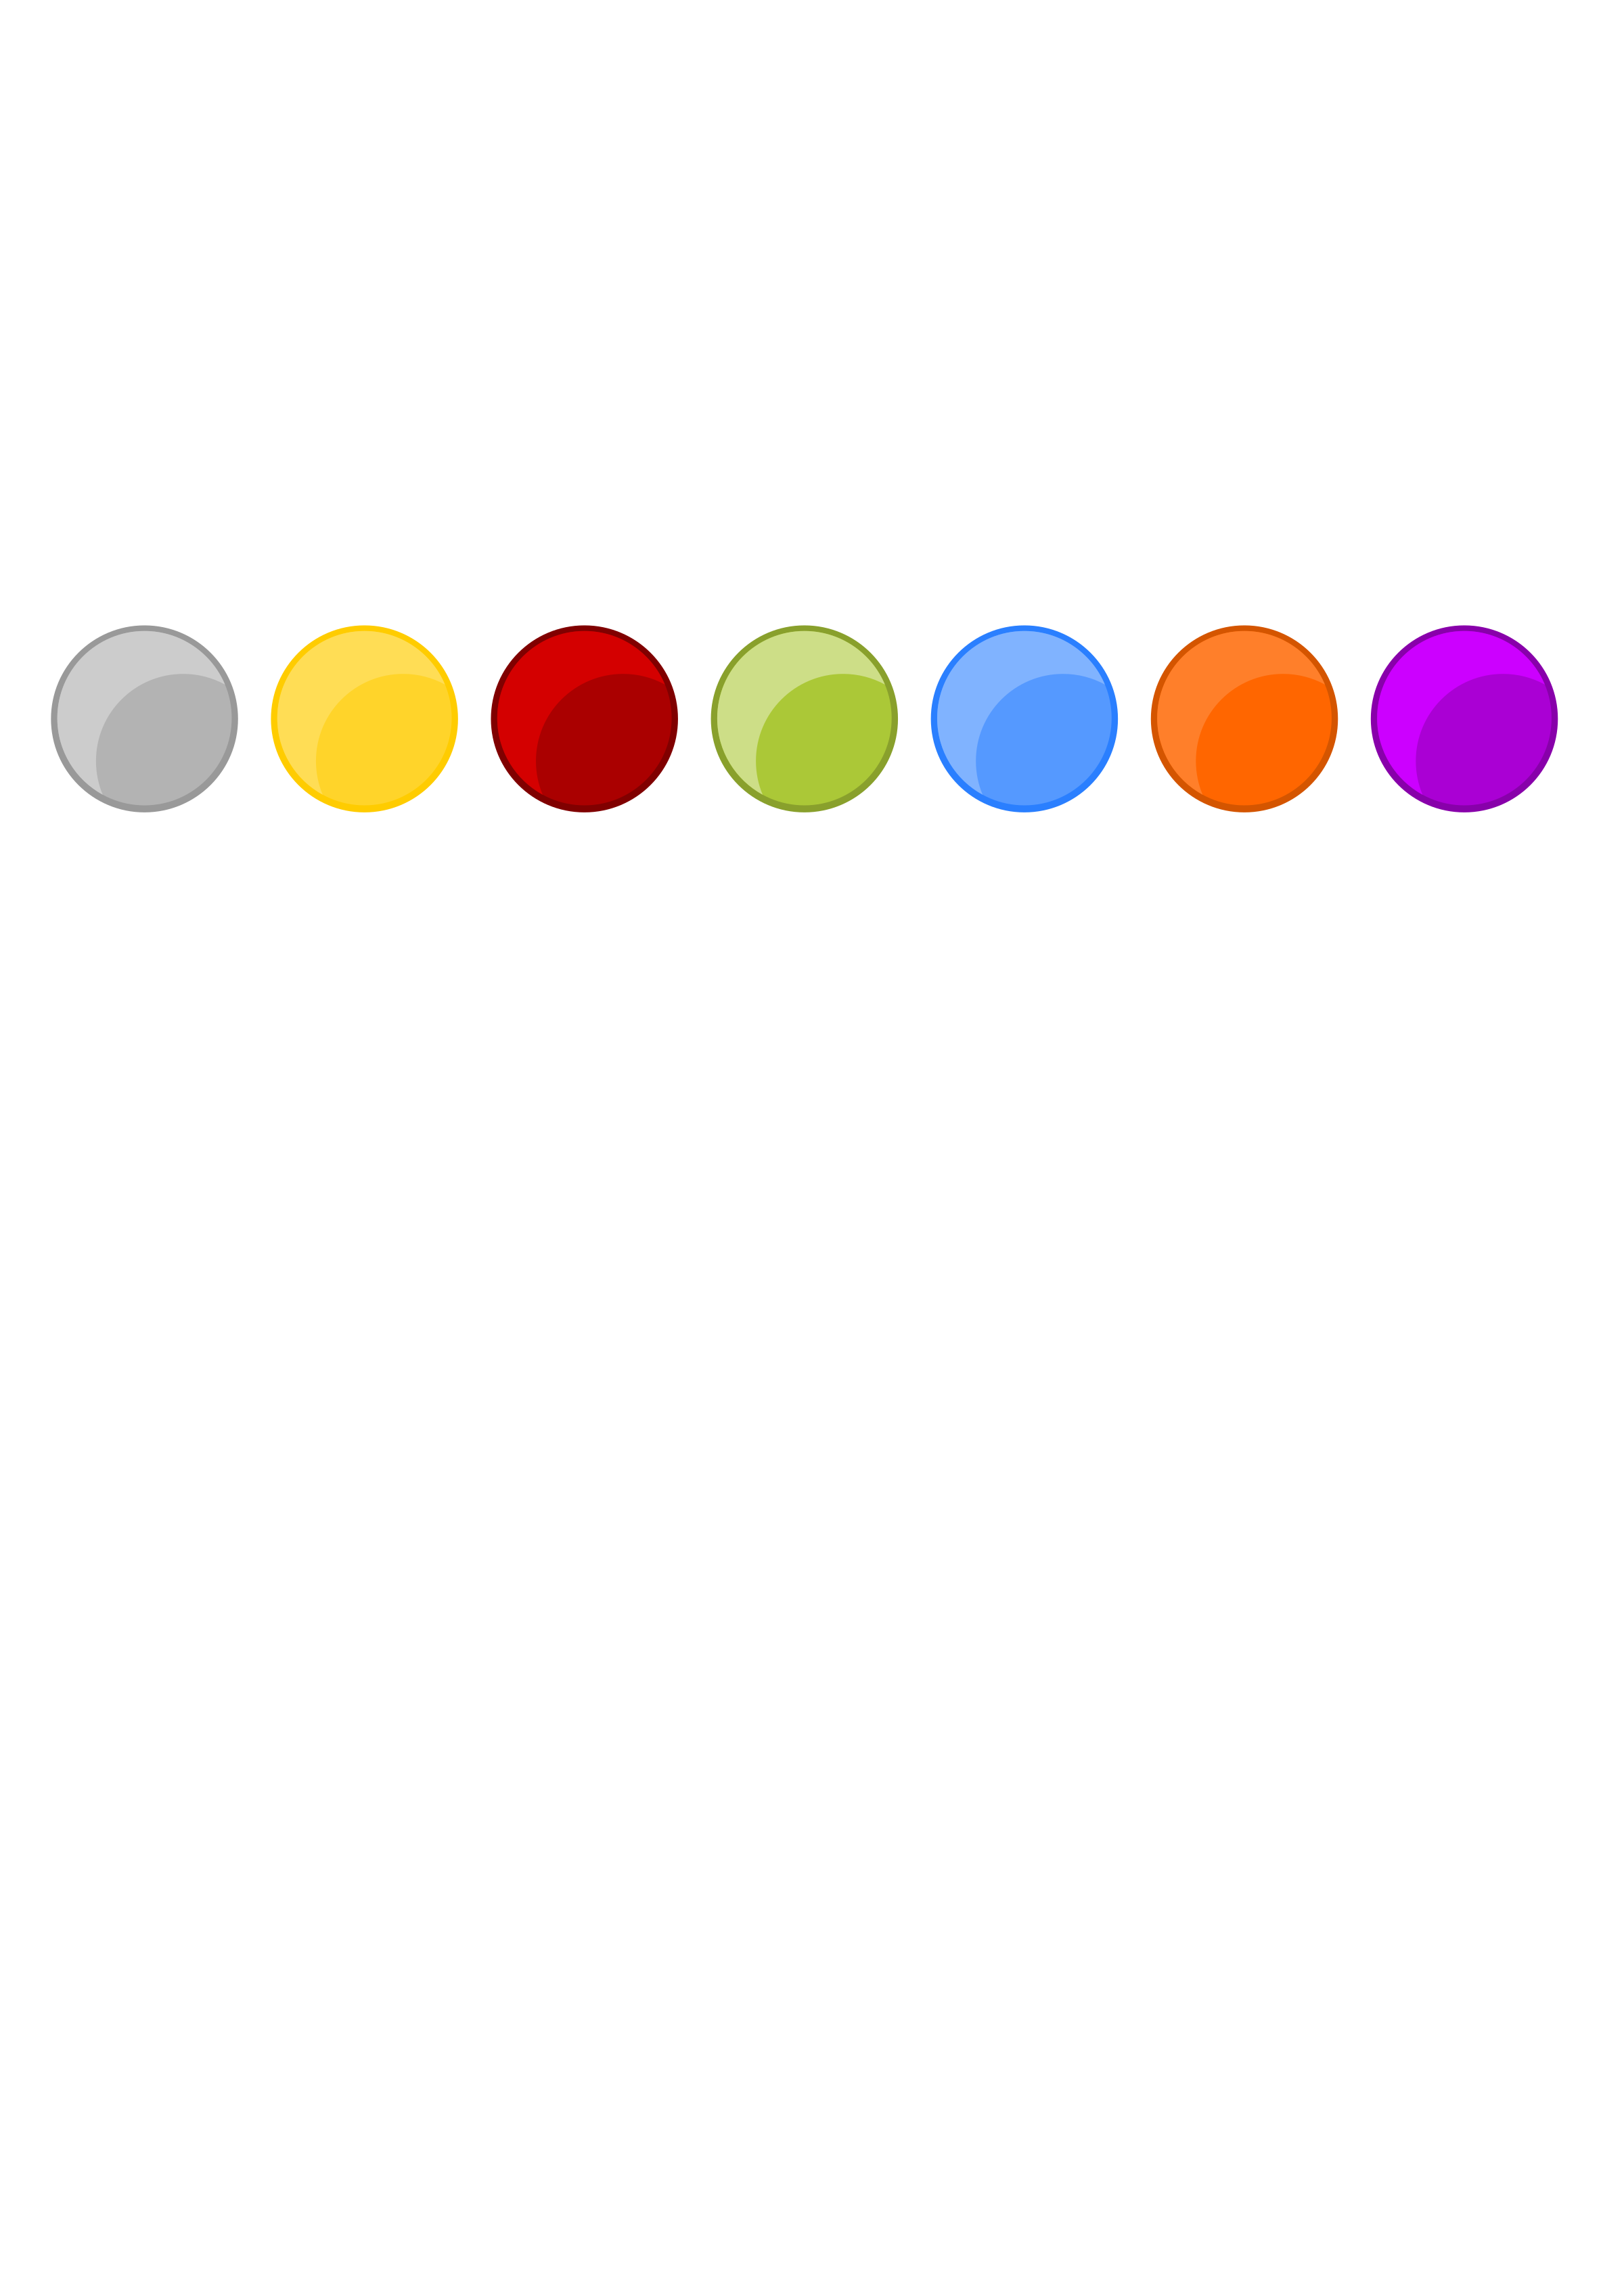 Colorful Circle Icon Backgrounds Clip arts